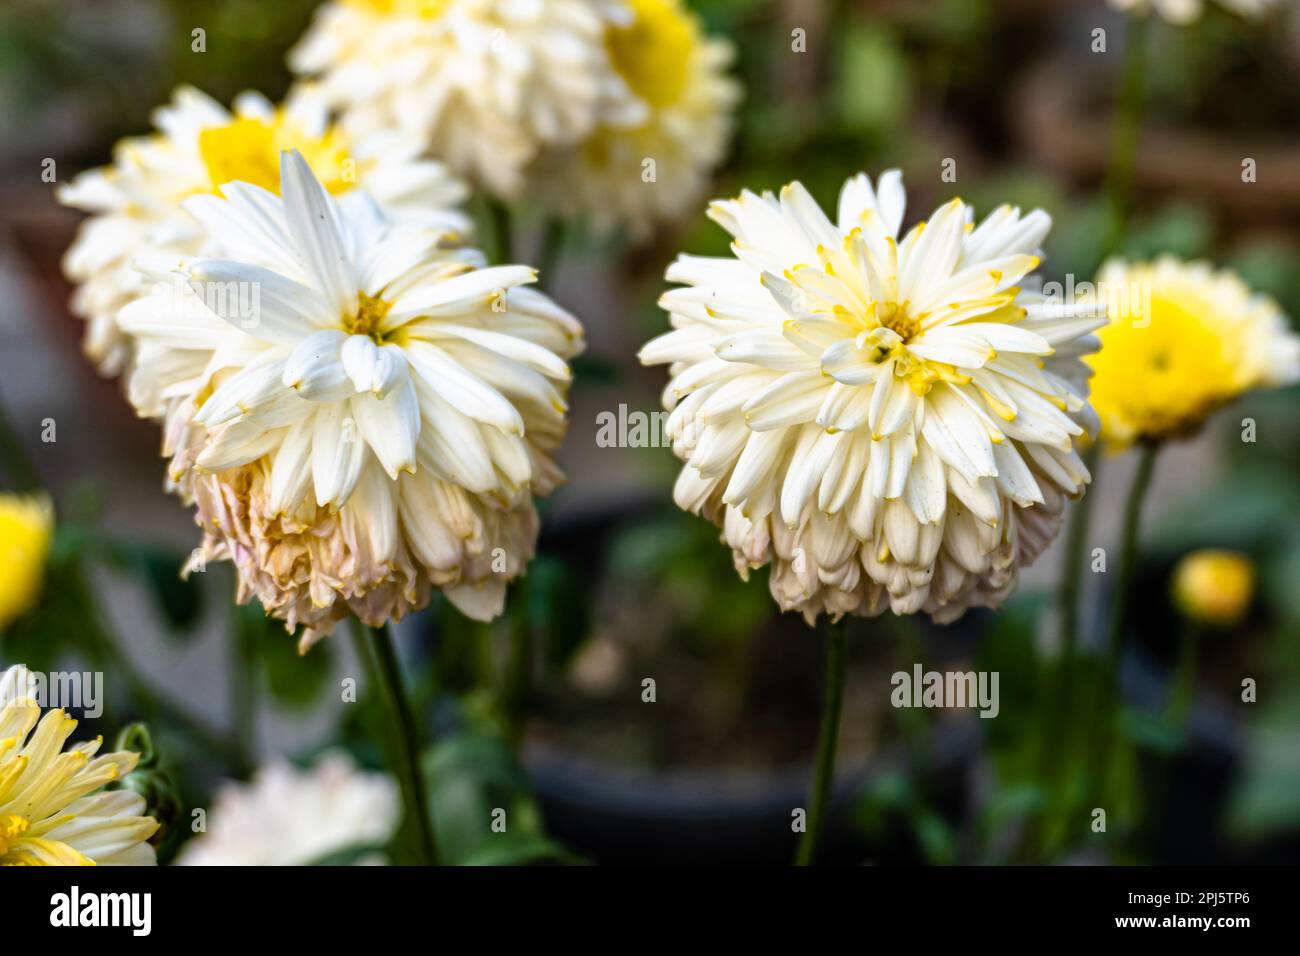 A bouquet of beautiful chrysanthemum flowers outdoors. Chrysanthemums in the garden. White color chrysanthemum flower. Stock Photo